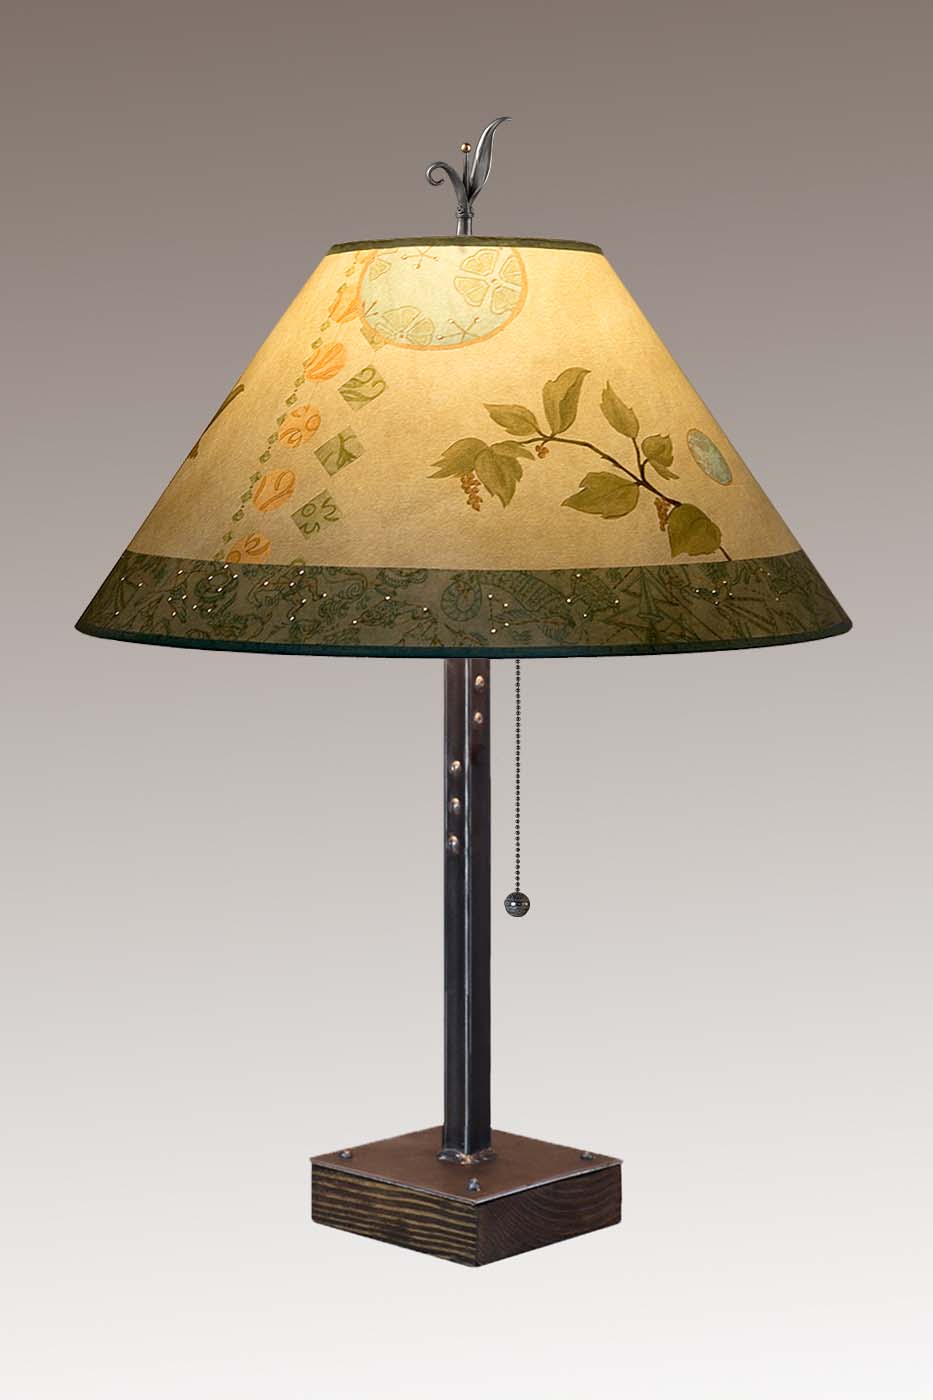 Janna Ugone & Co Table Lamp Steel Table Lamp on Wood with Large Conical Shade in Celestial Leaf